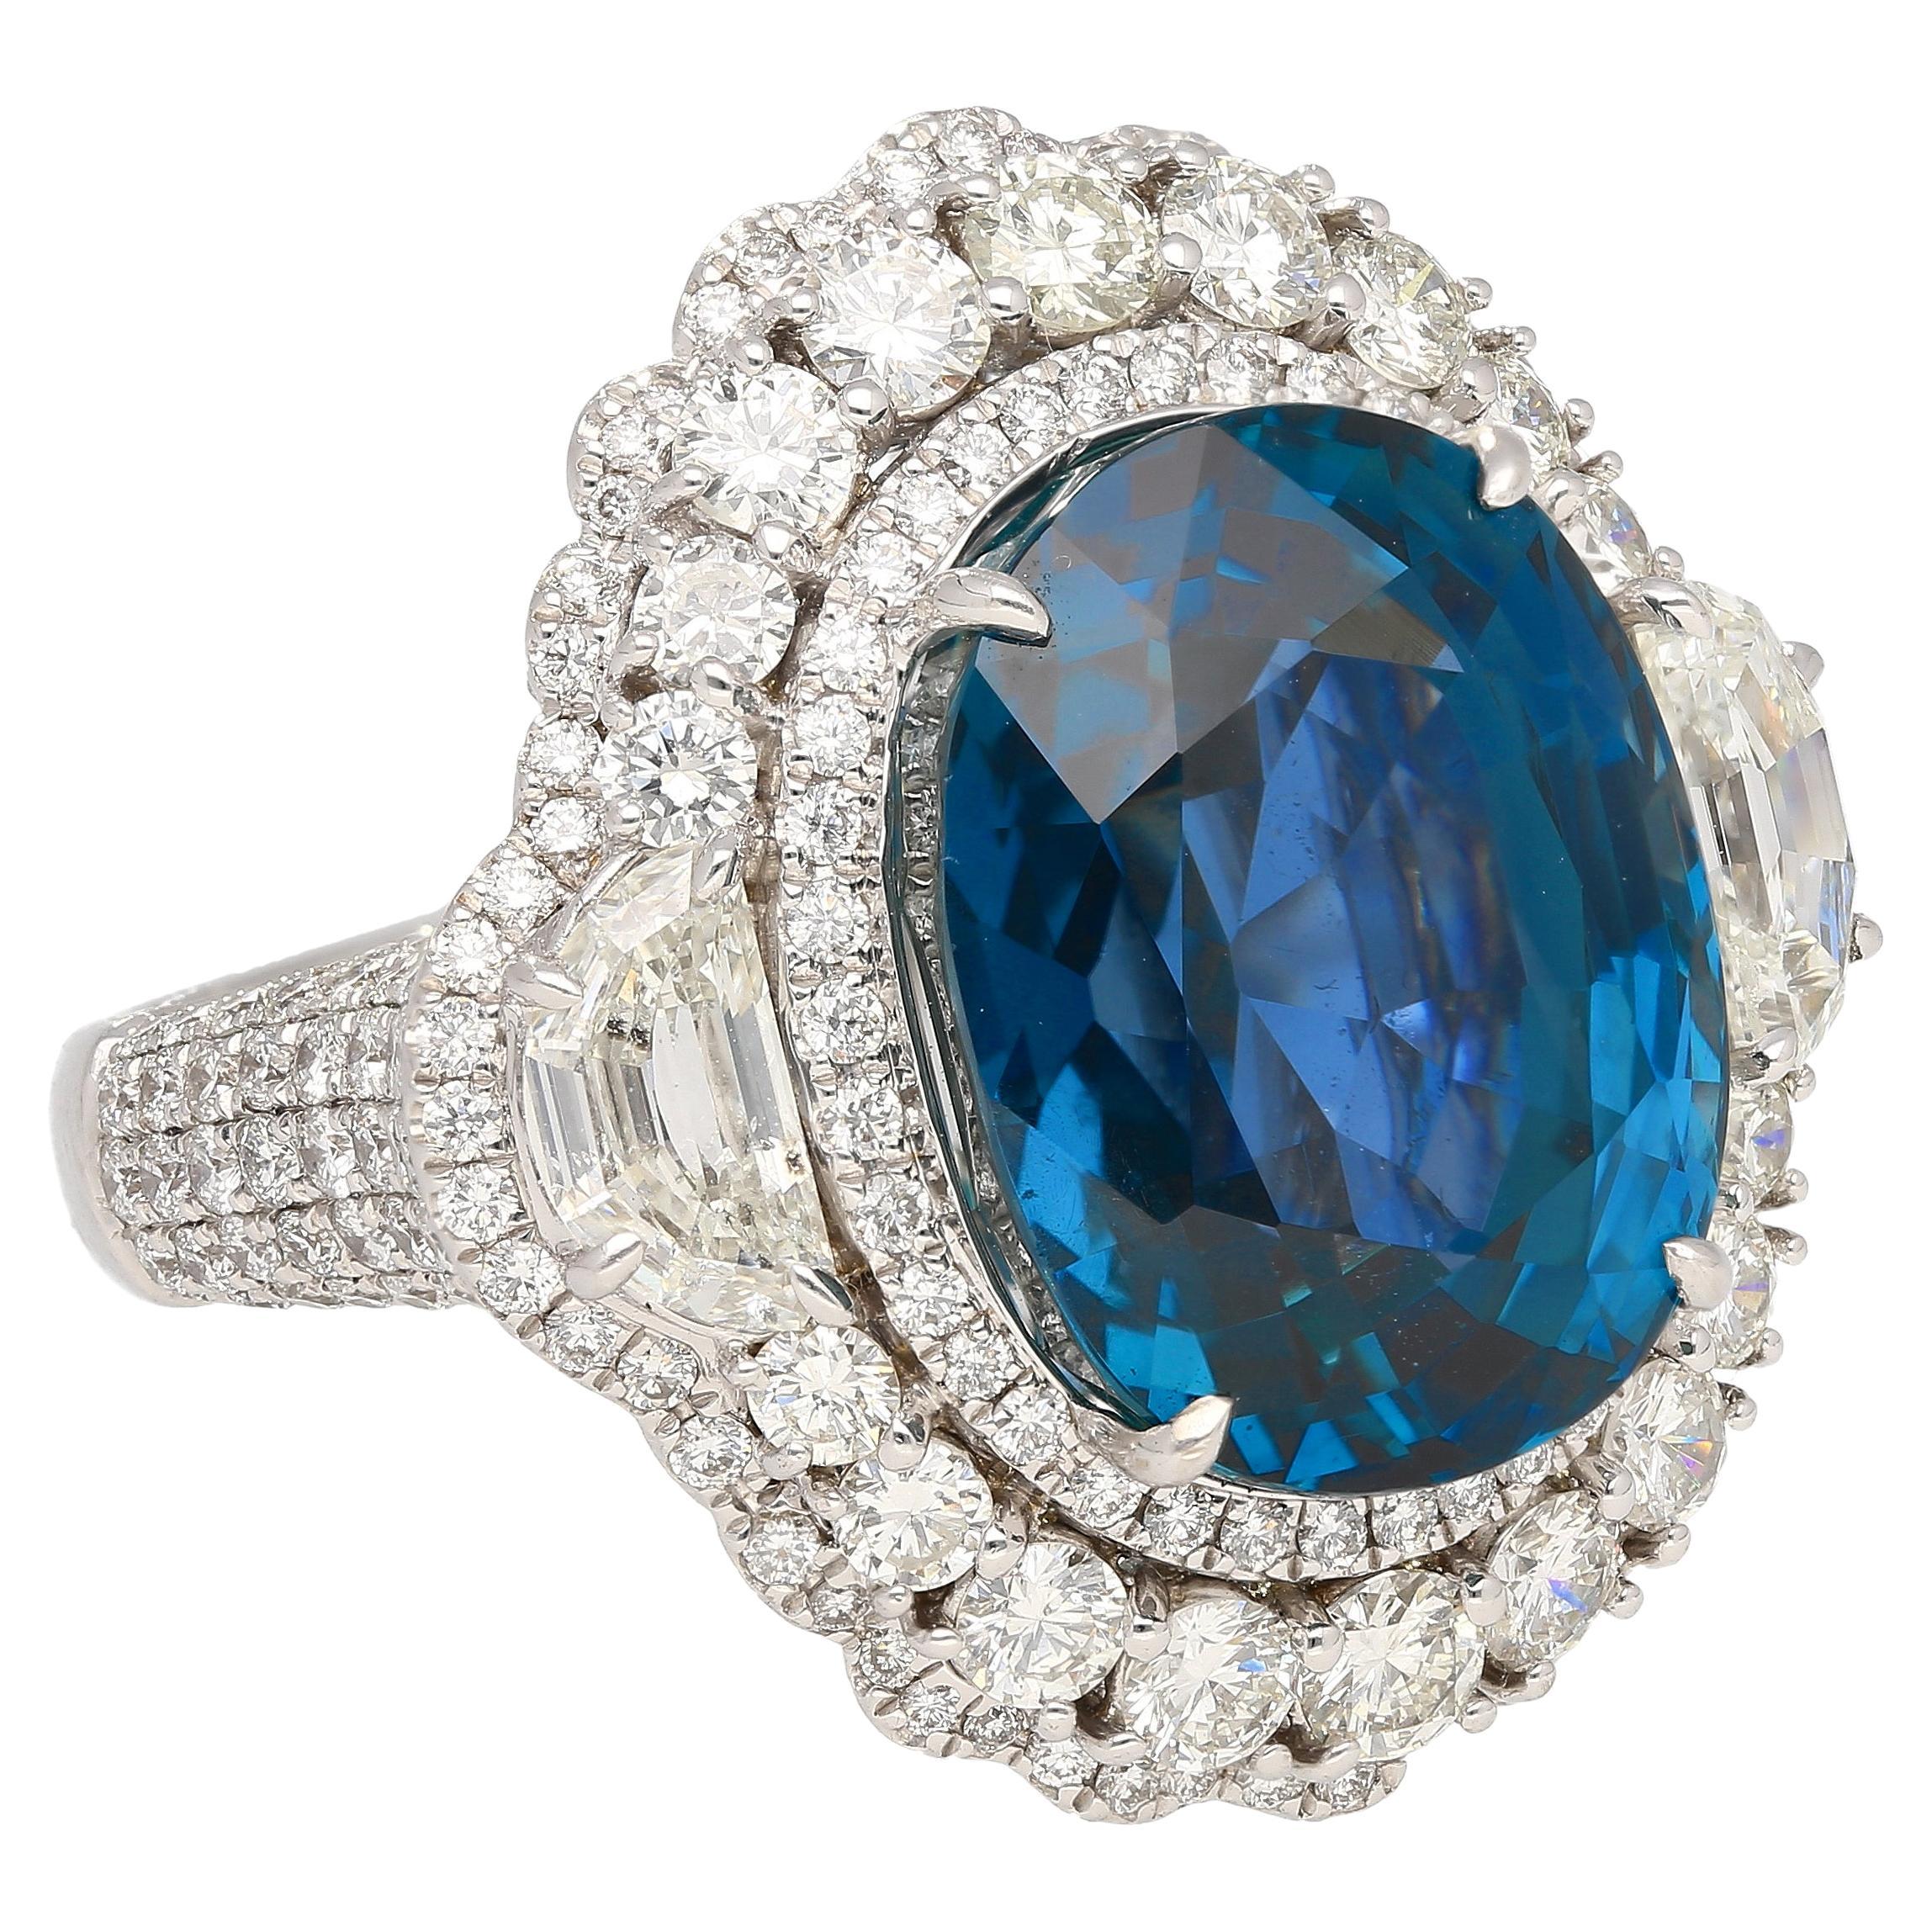 18K White Gold Ring, meticulously crafted with a prong setting to showcase its exquisite centerpiece – an 18.16-carat Burmese Sapphire, originating from the prestigious Mogok Pain Pyit region. This oval-cut Blue Sapphire bears no heat treatment or